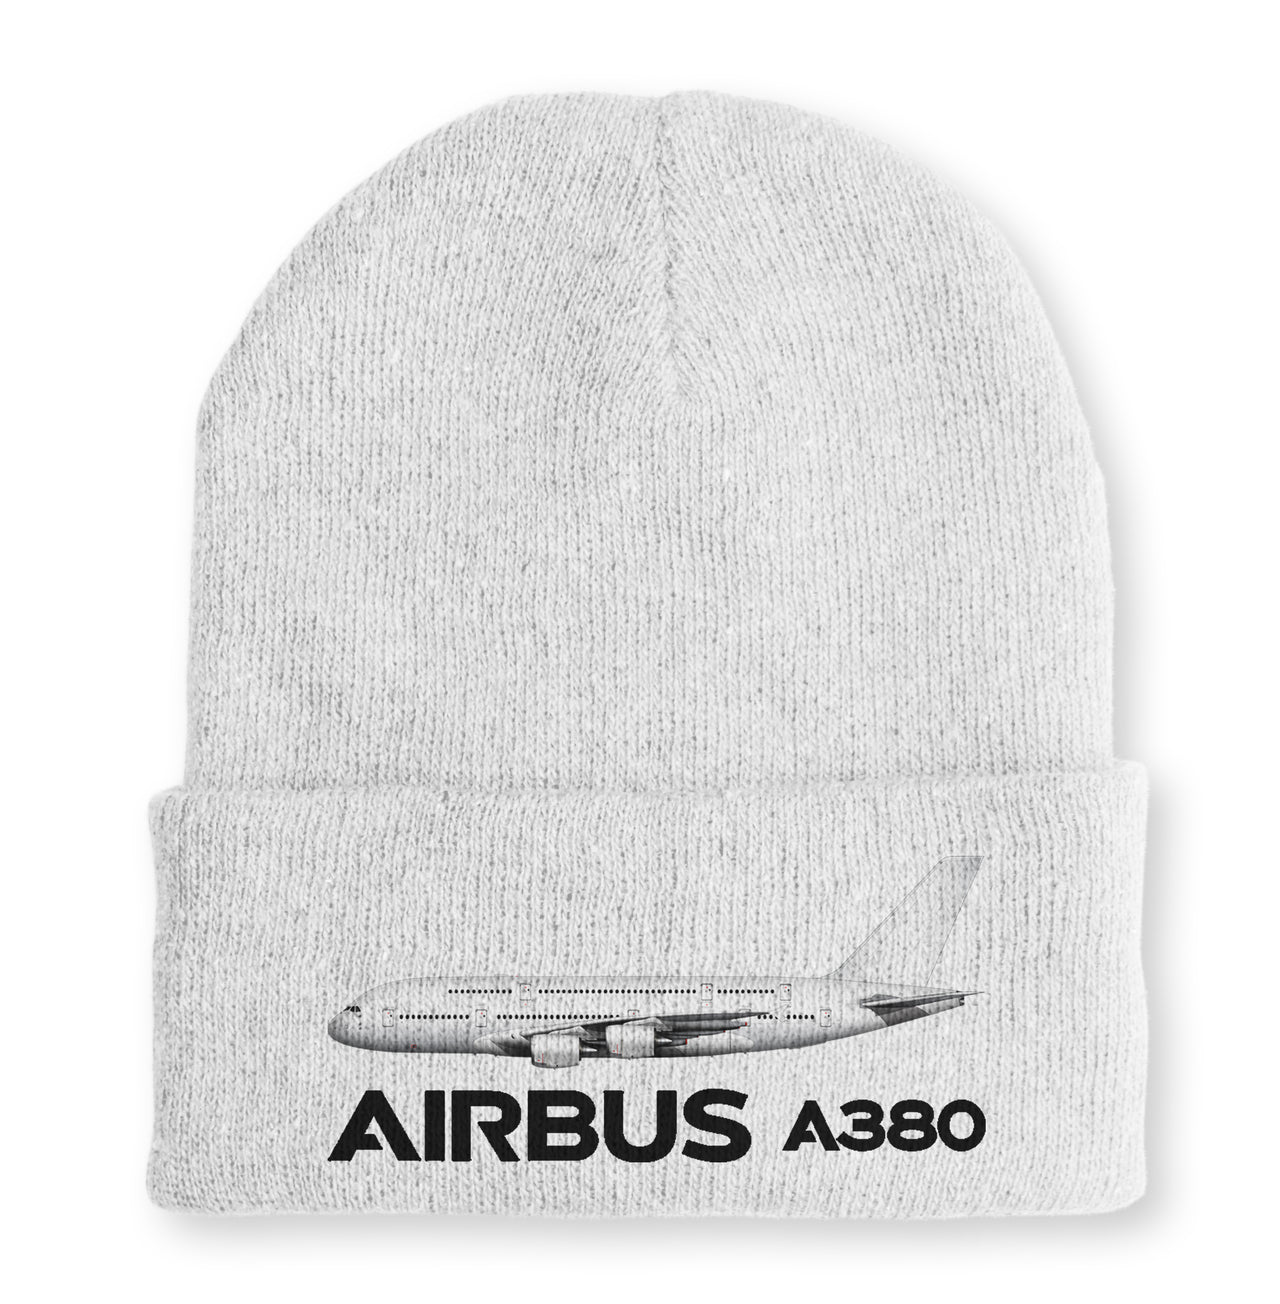 The Airbus A380 Embroidered Beanies